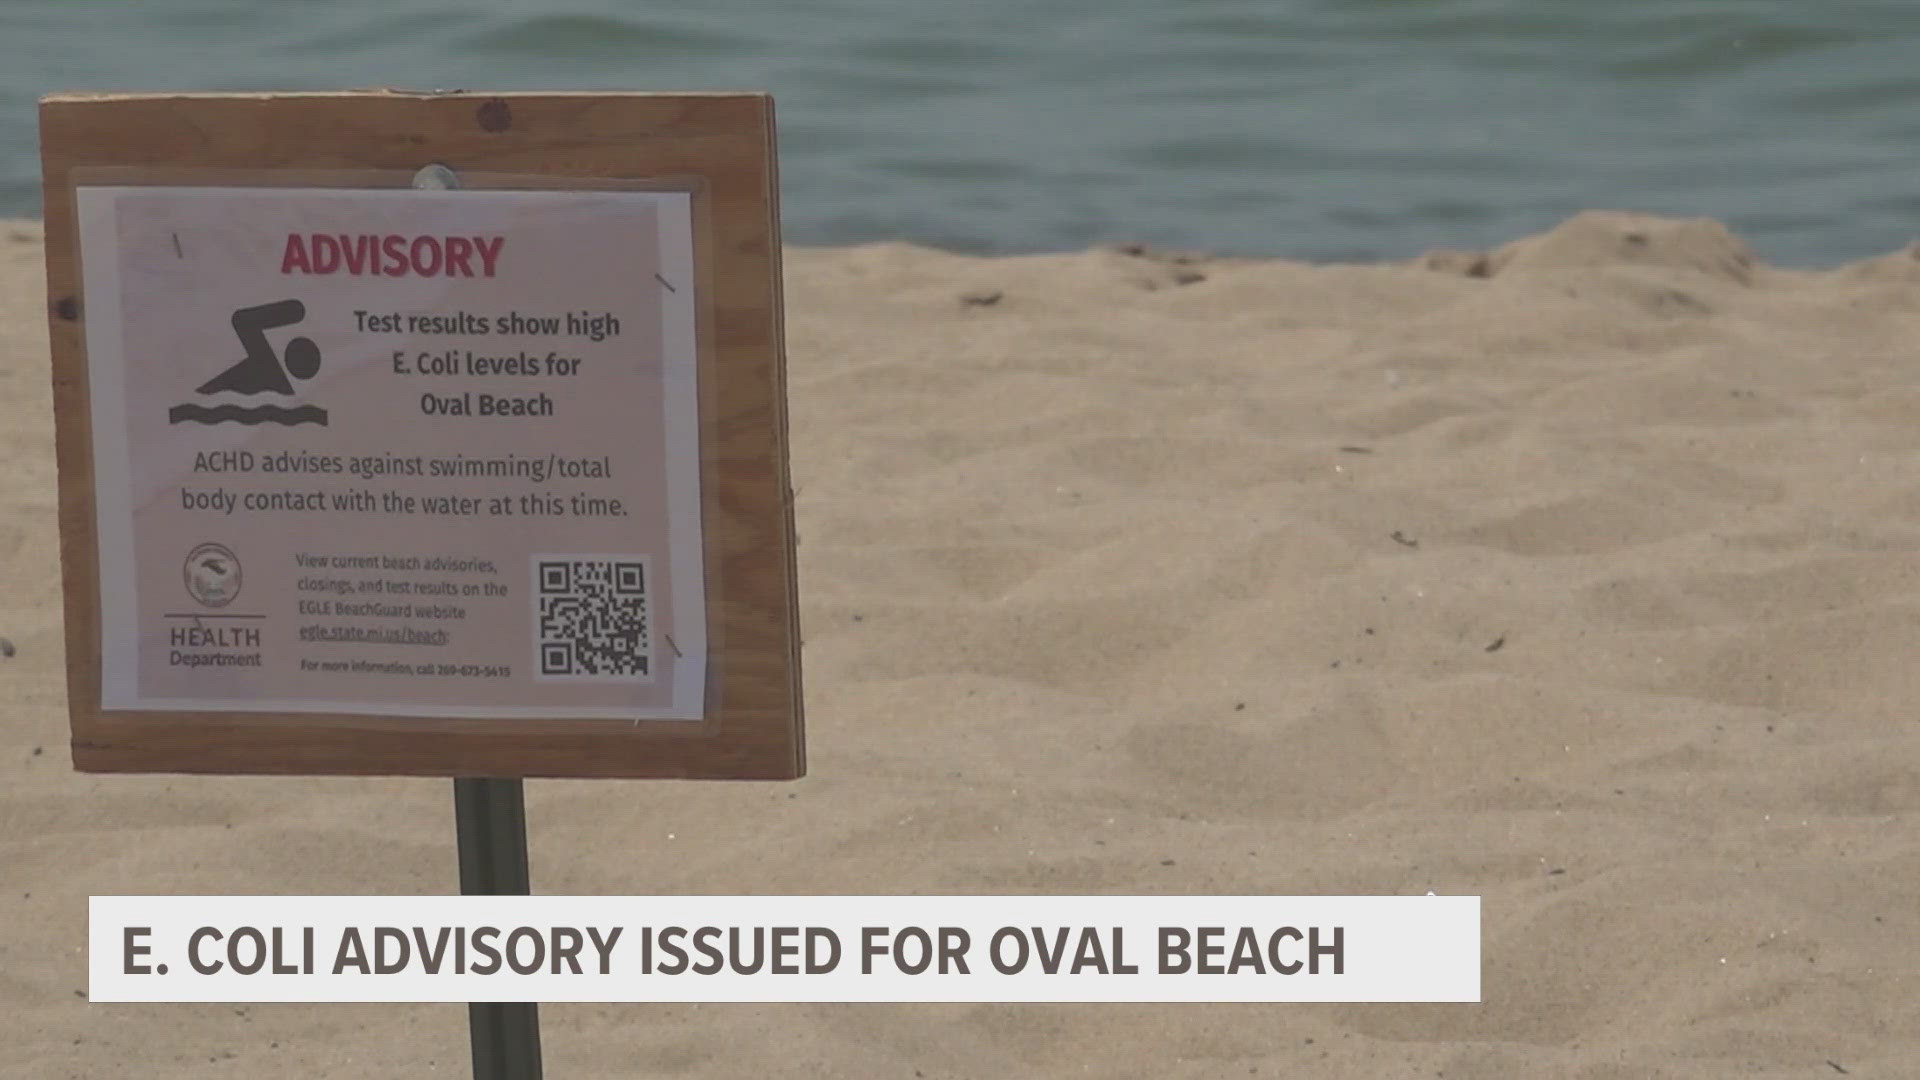 According to the Allegan County Health Department, E. coli levels are above the state's limit for total body contact at Oval Beach.